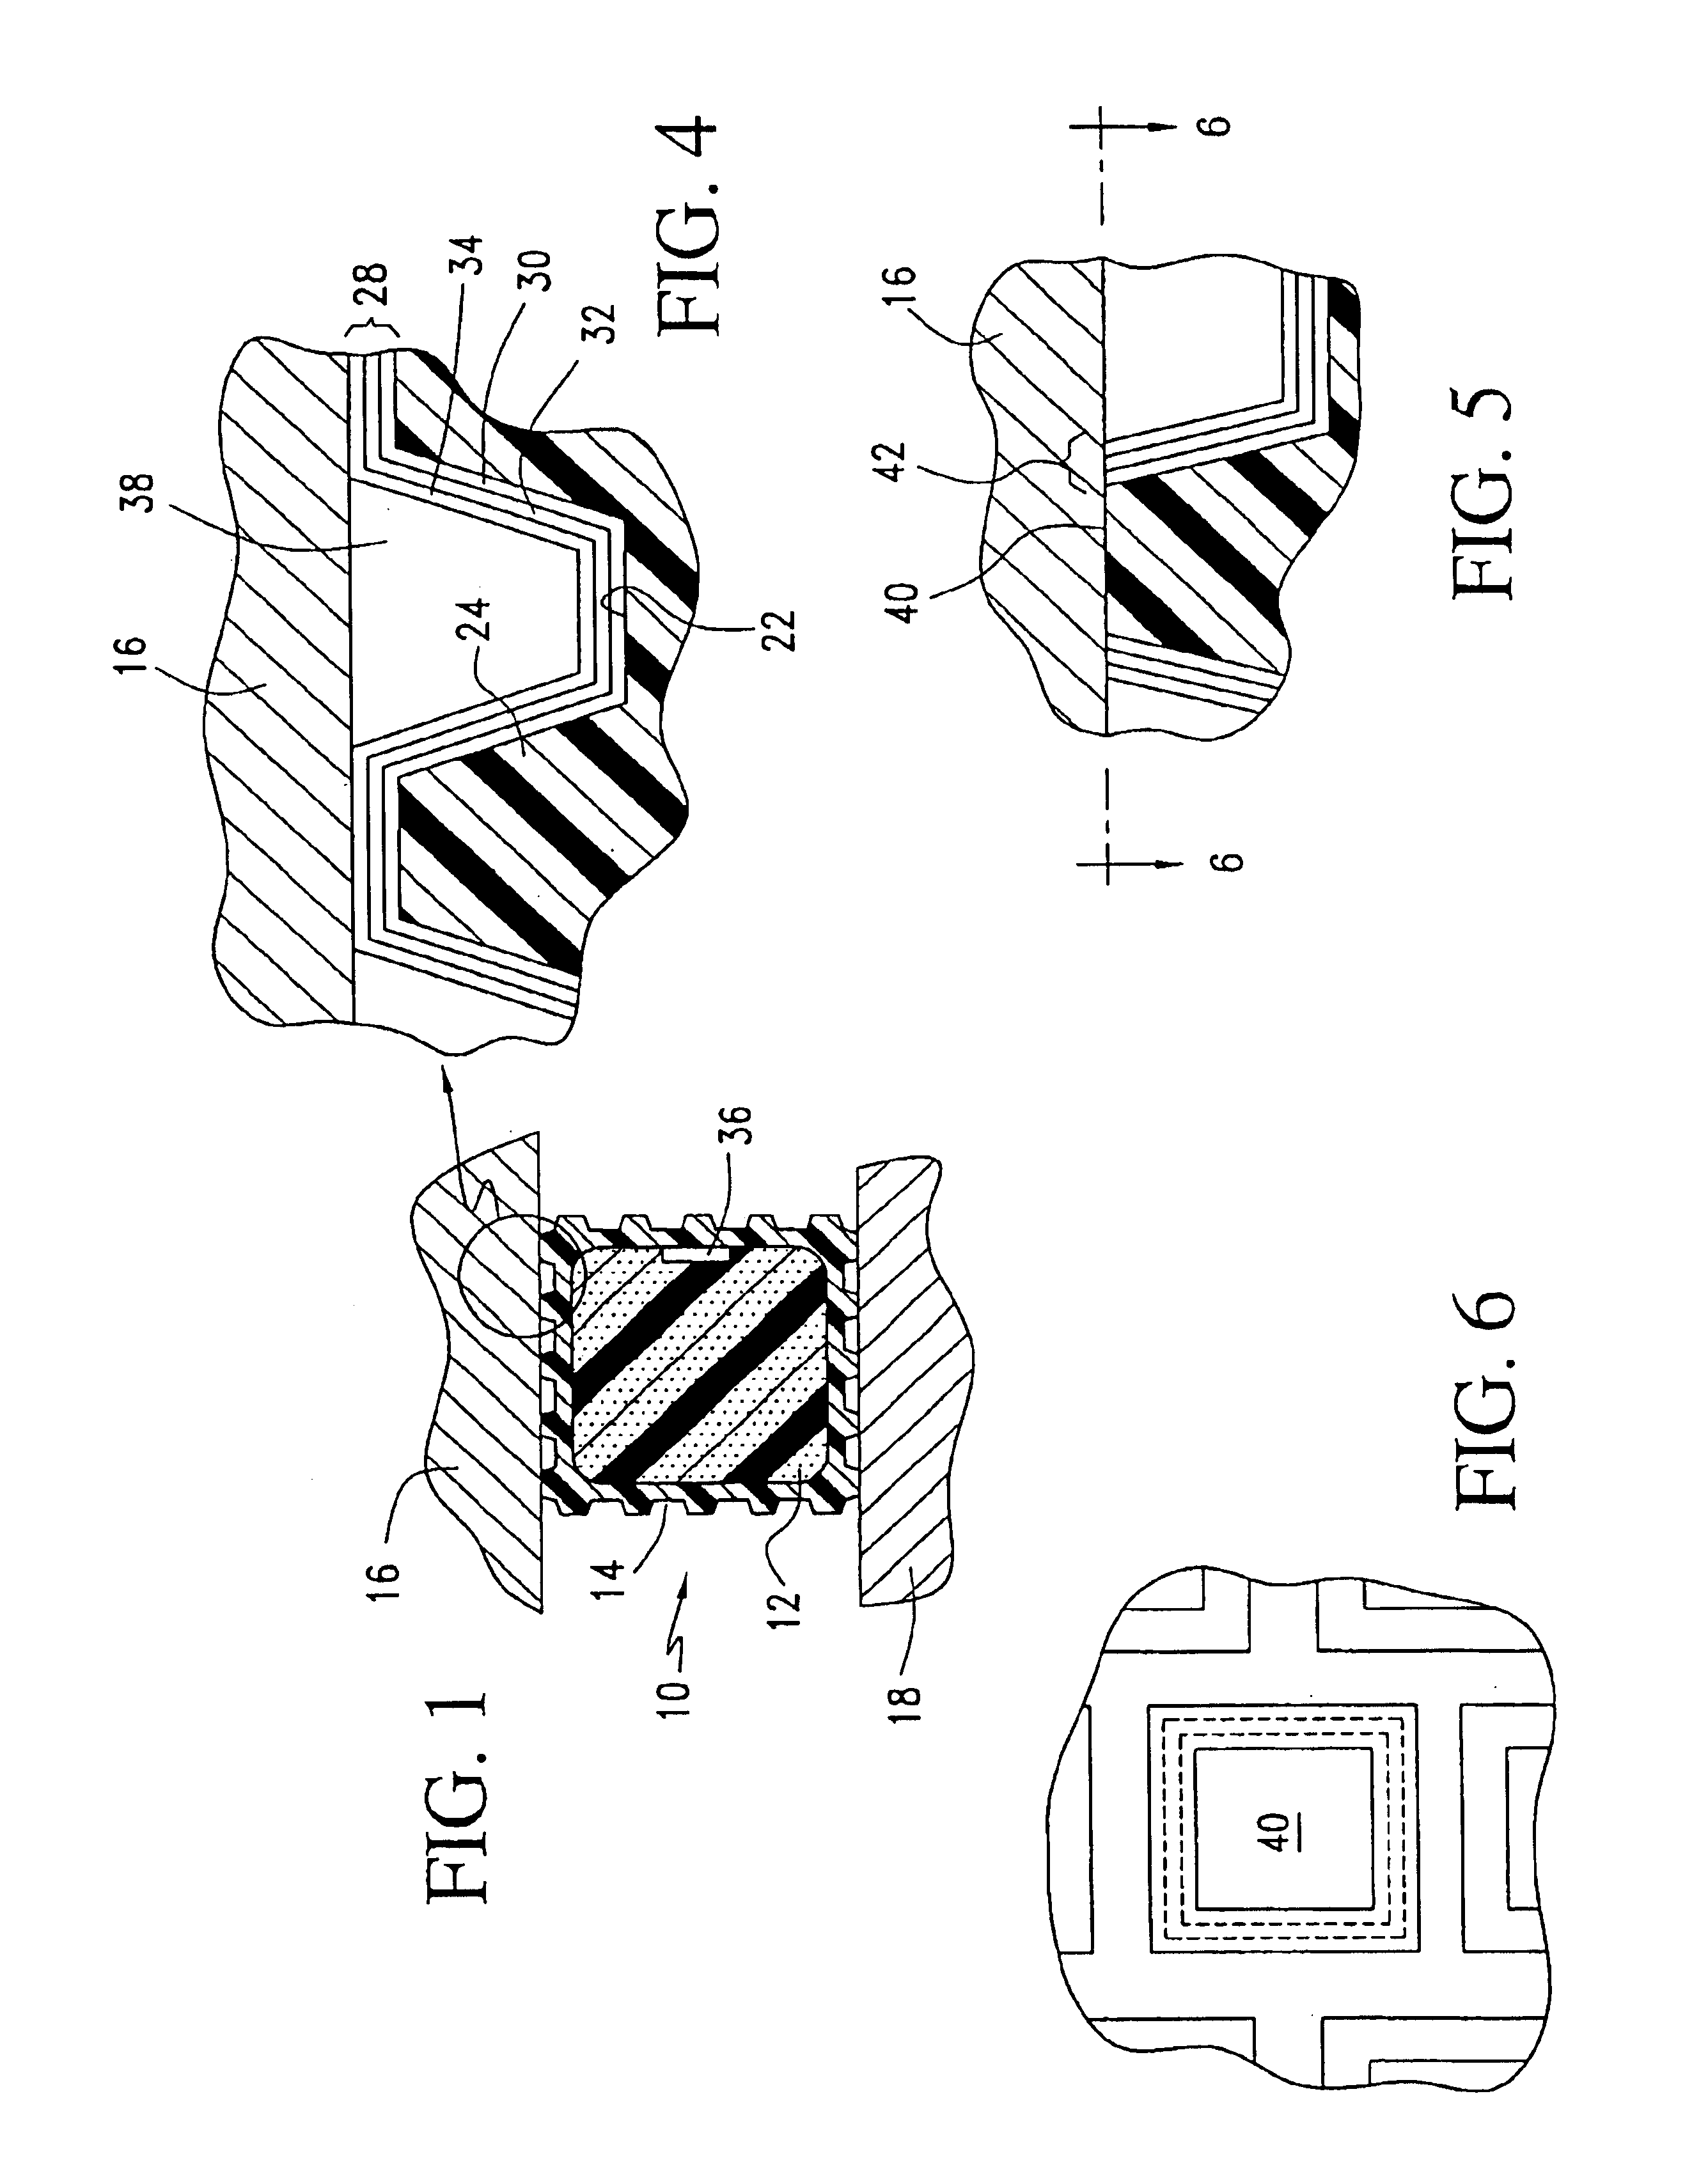 Method for making an abrasion resistant conductive film and gasket